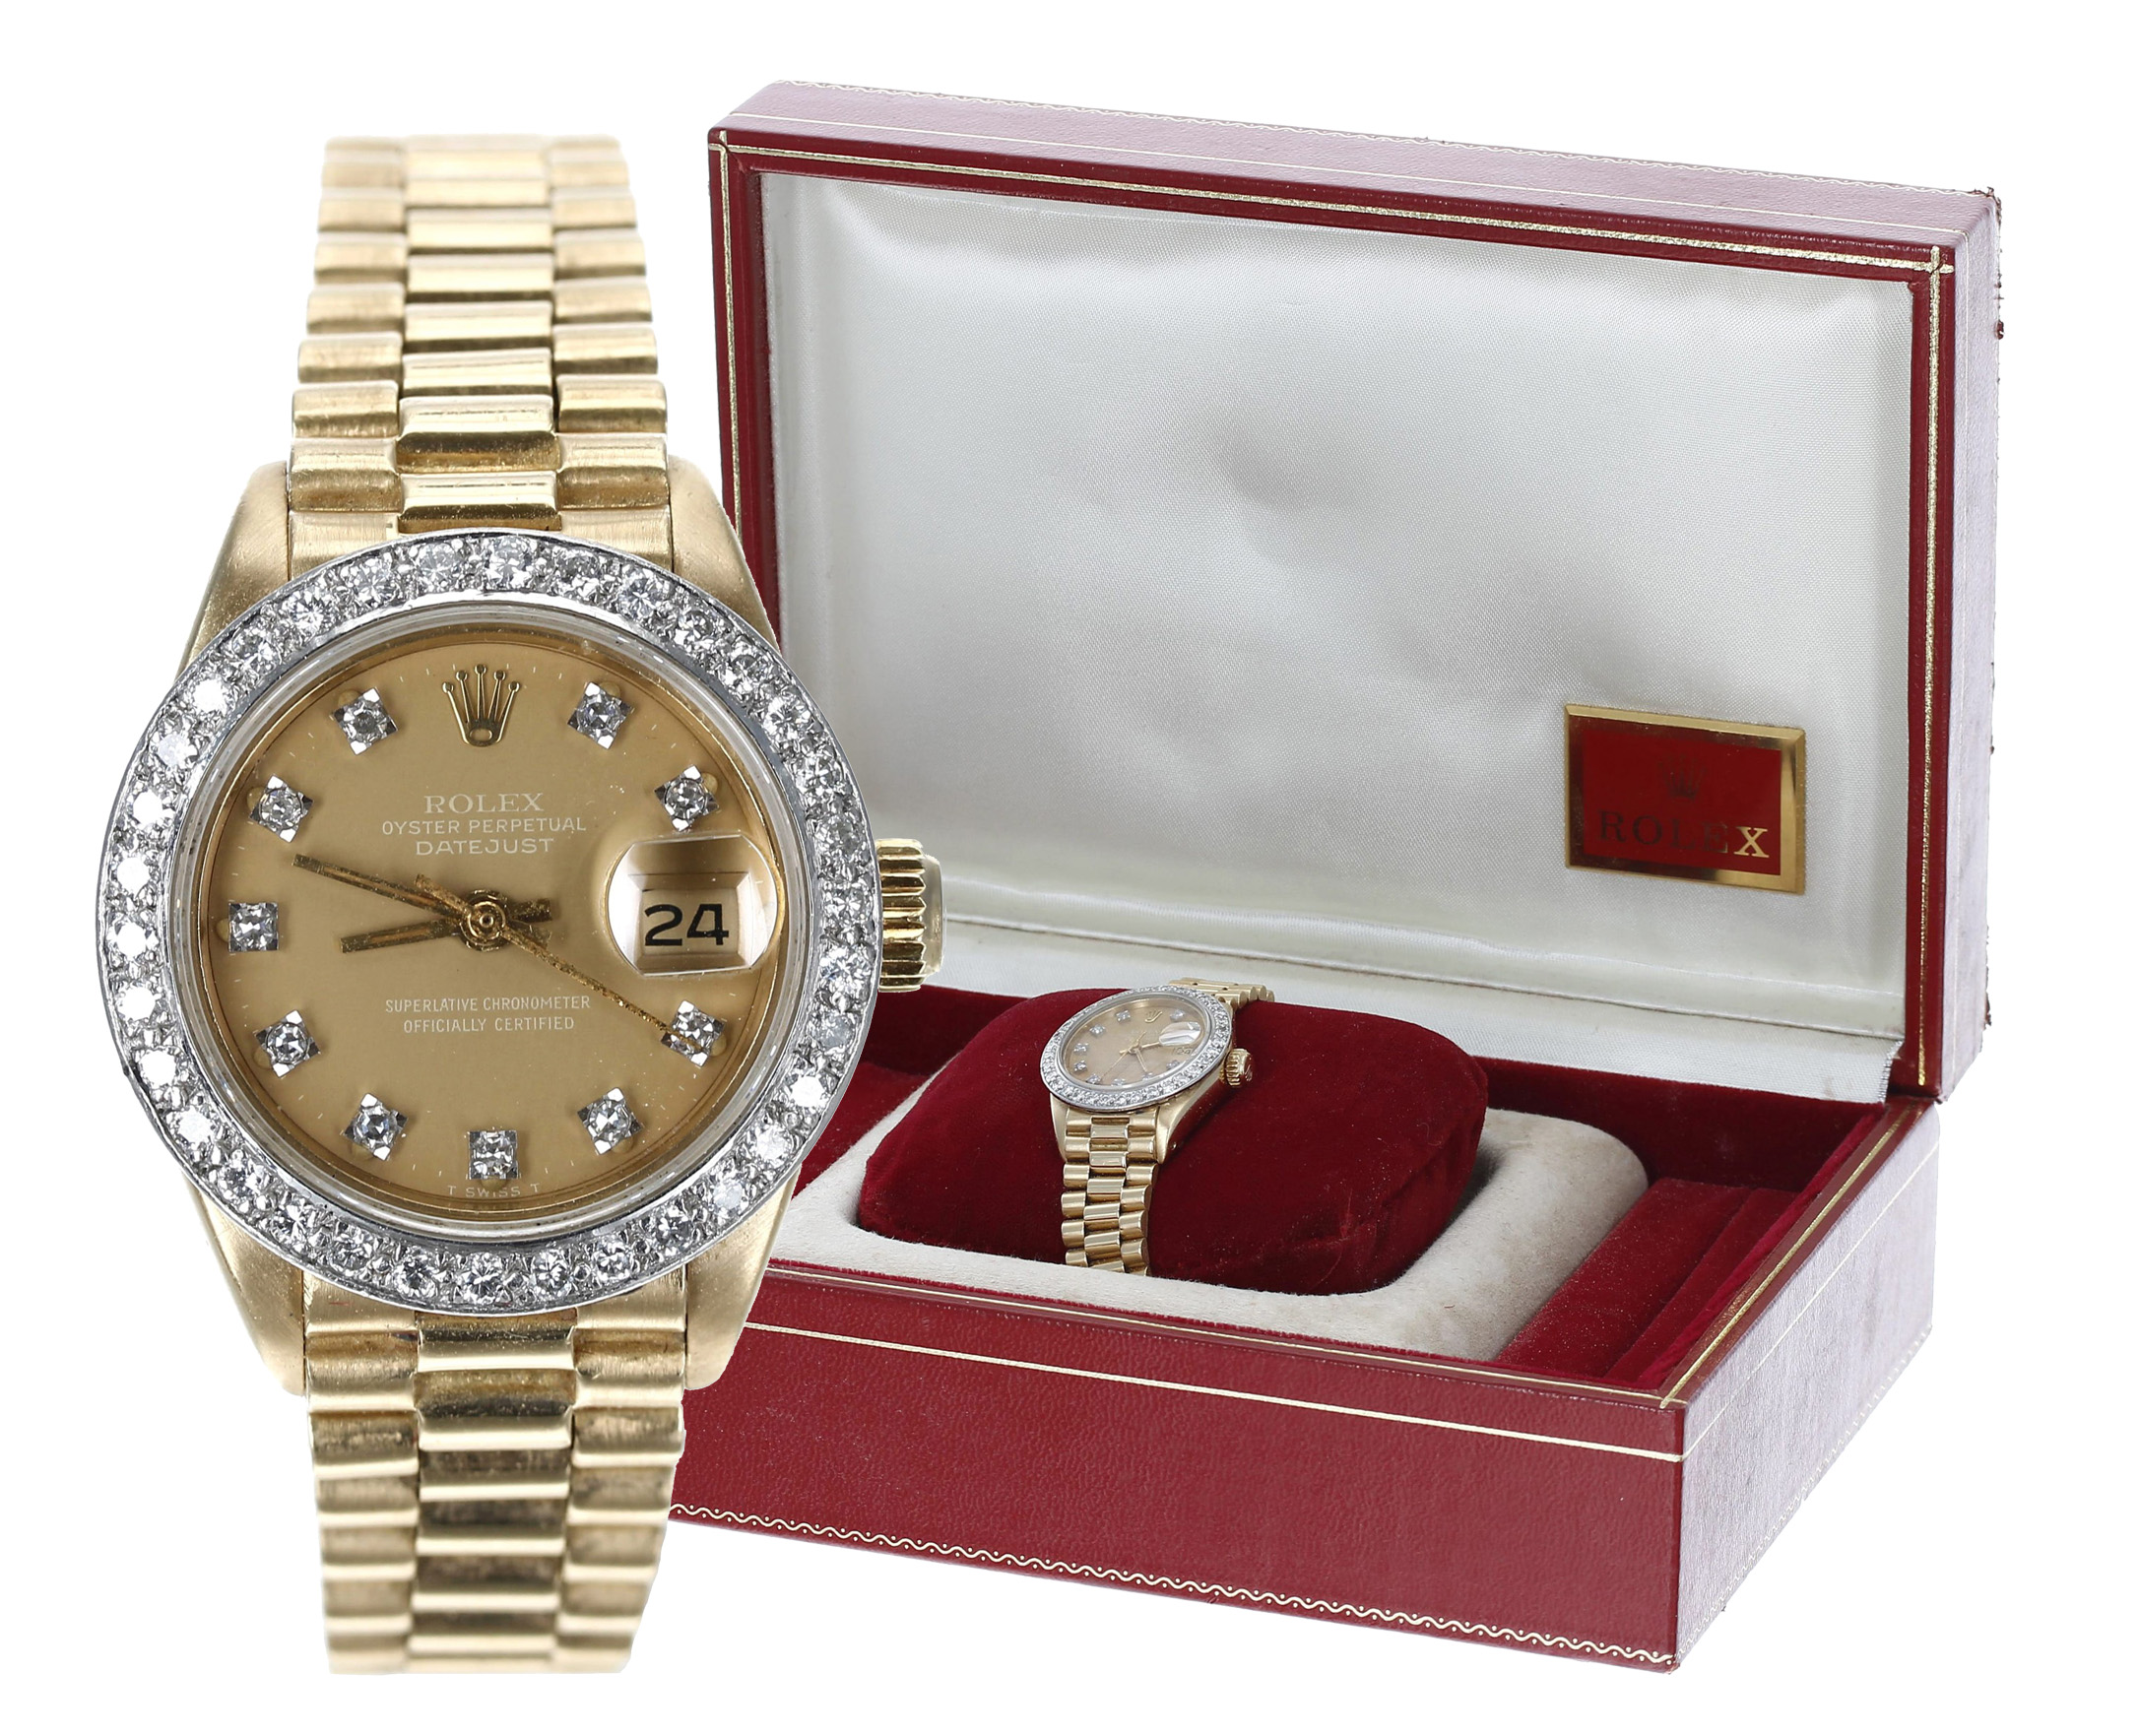 Rolex Oyster Perpetual Datejust 18ct diamond set lady's wristwatch, reference no. 6917, serial no.